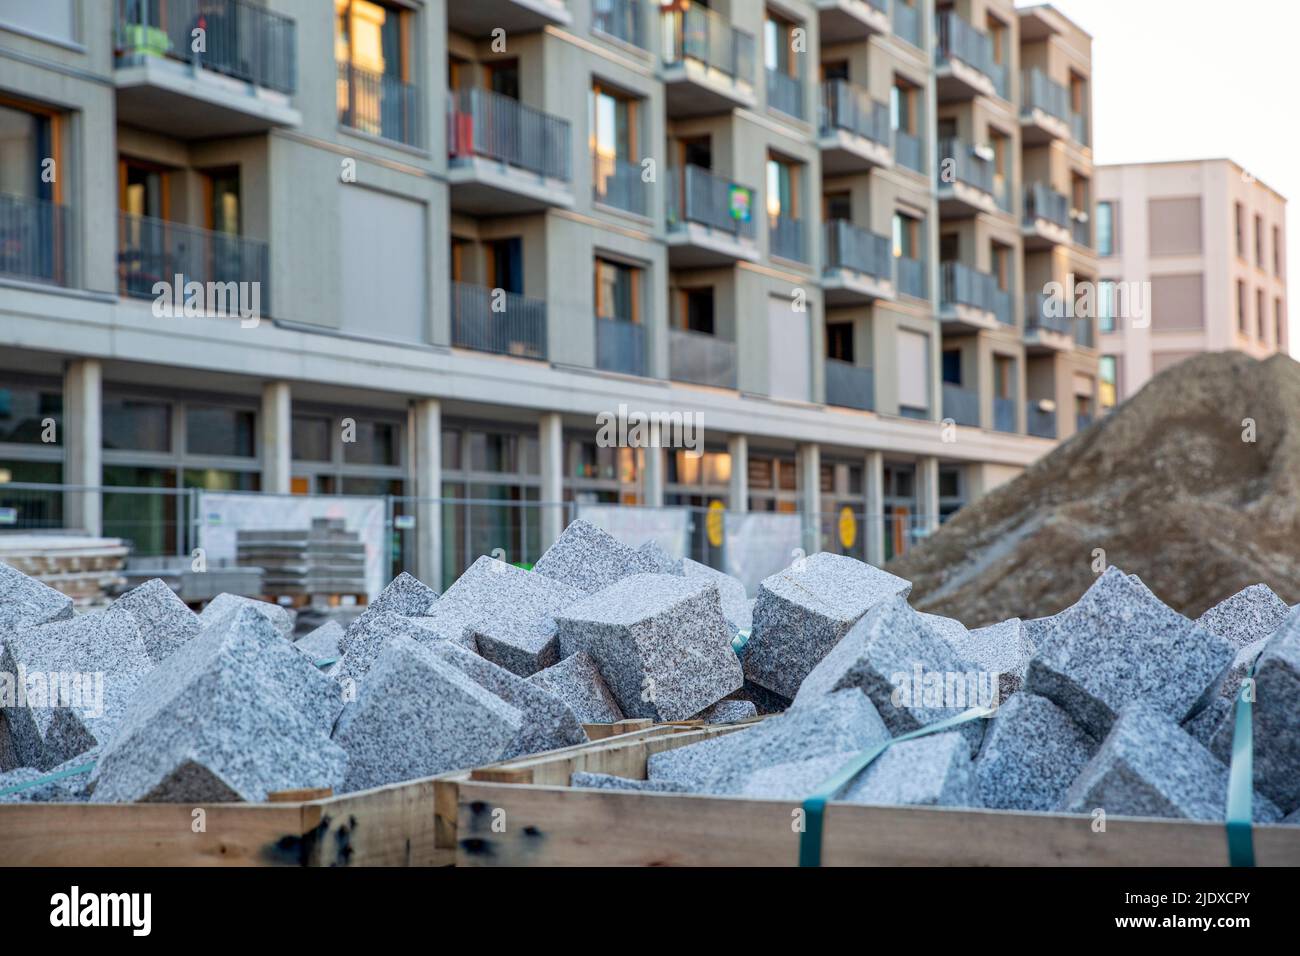 Germany, Bavaria, Munich, Stone blocks at construction site in front of apartments in Prinz-Eugen-Park complex Stock Photo